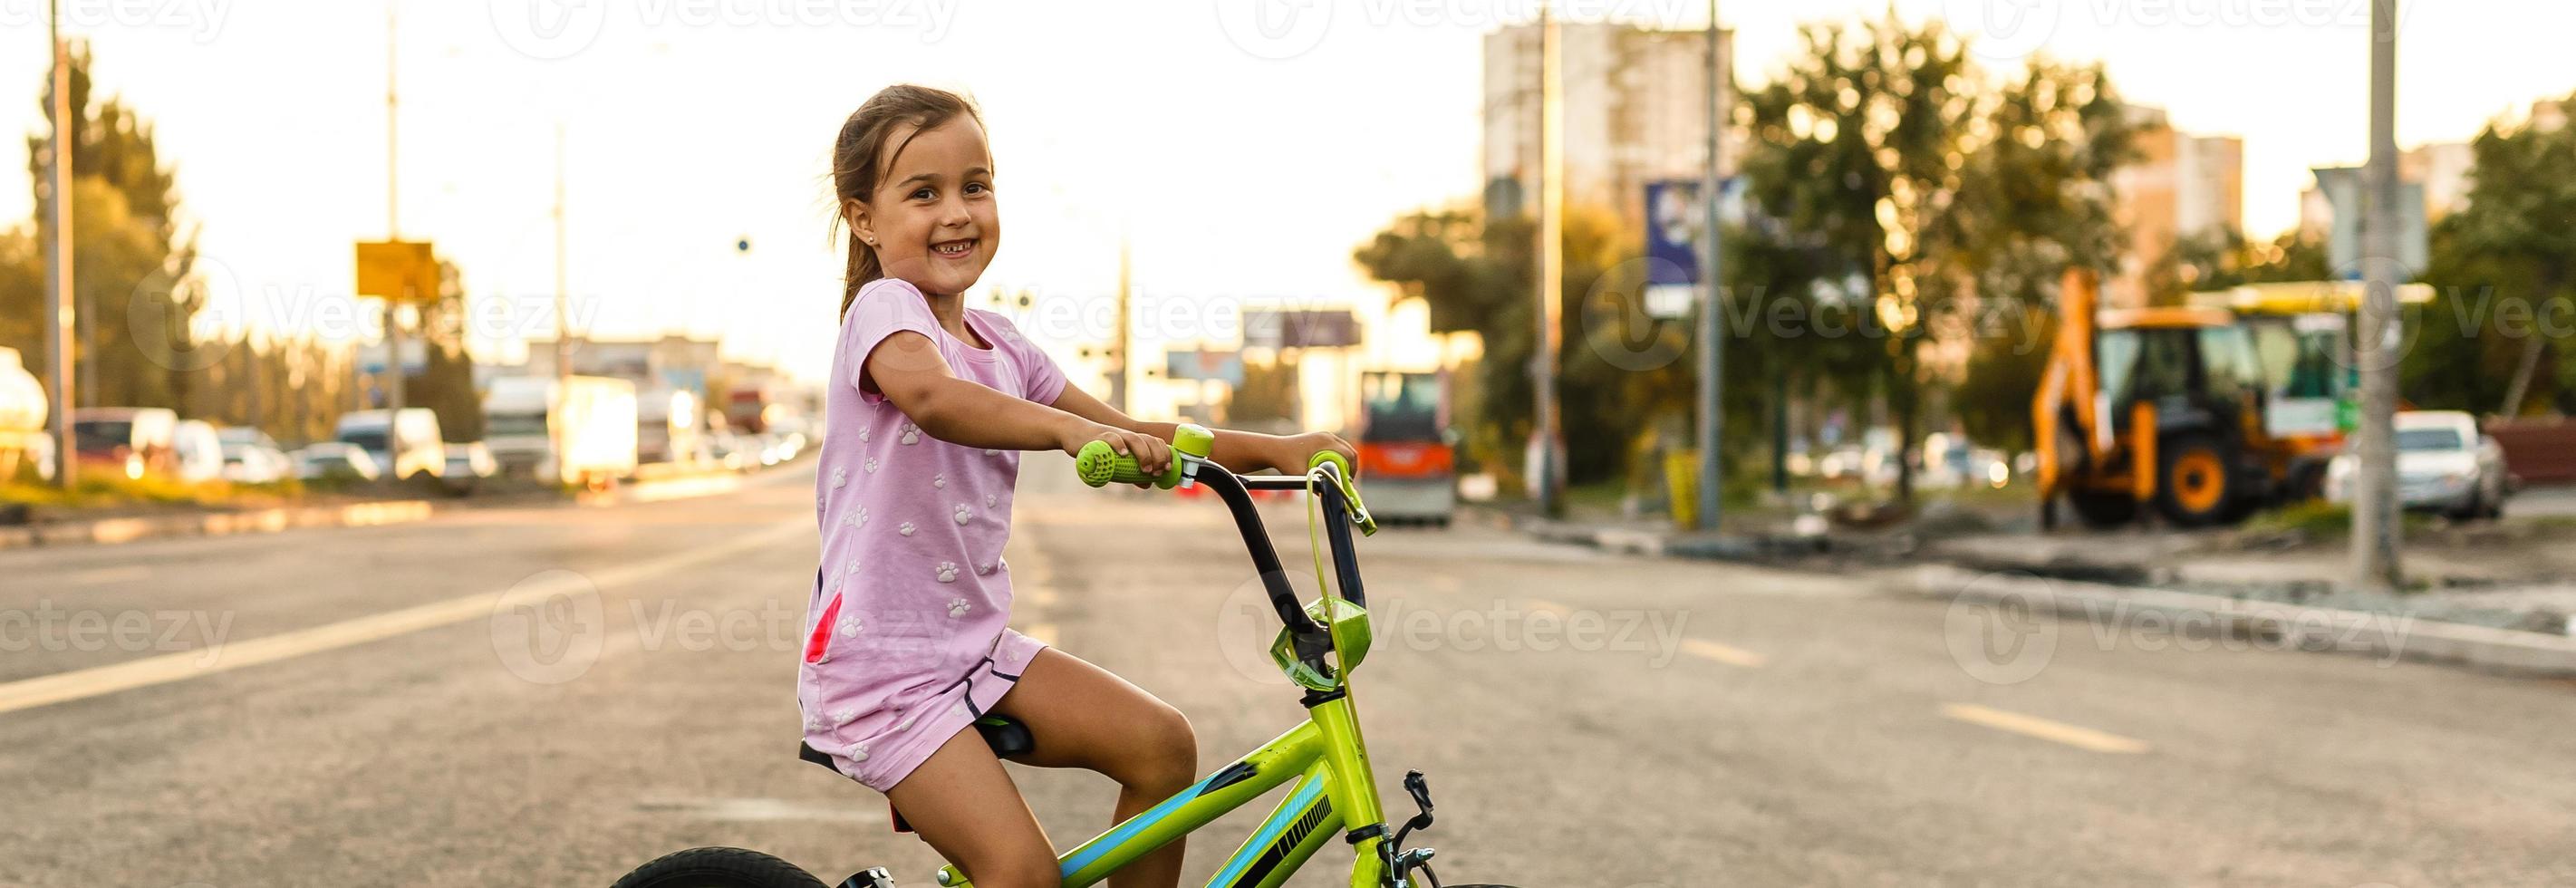 Children learning to drive a bicycle on a driveway outside. Little girls riding bikes on asphalt road in the city wearing helmets as protective gear. photo